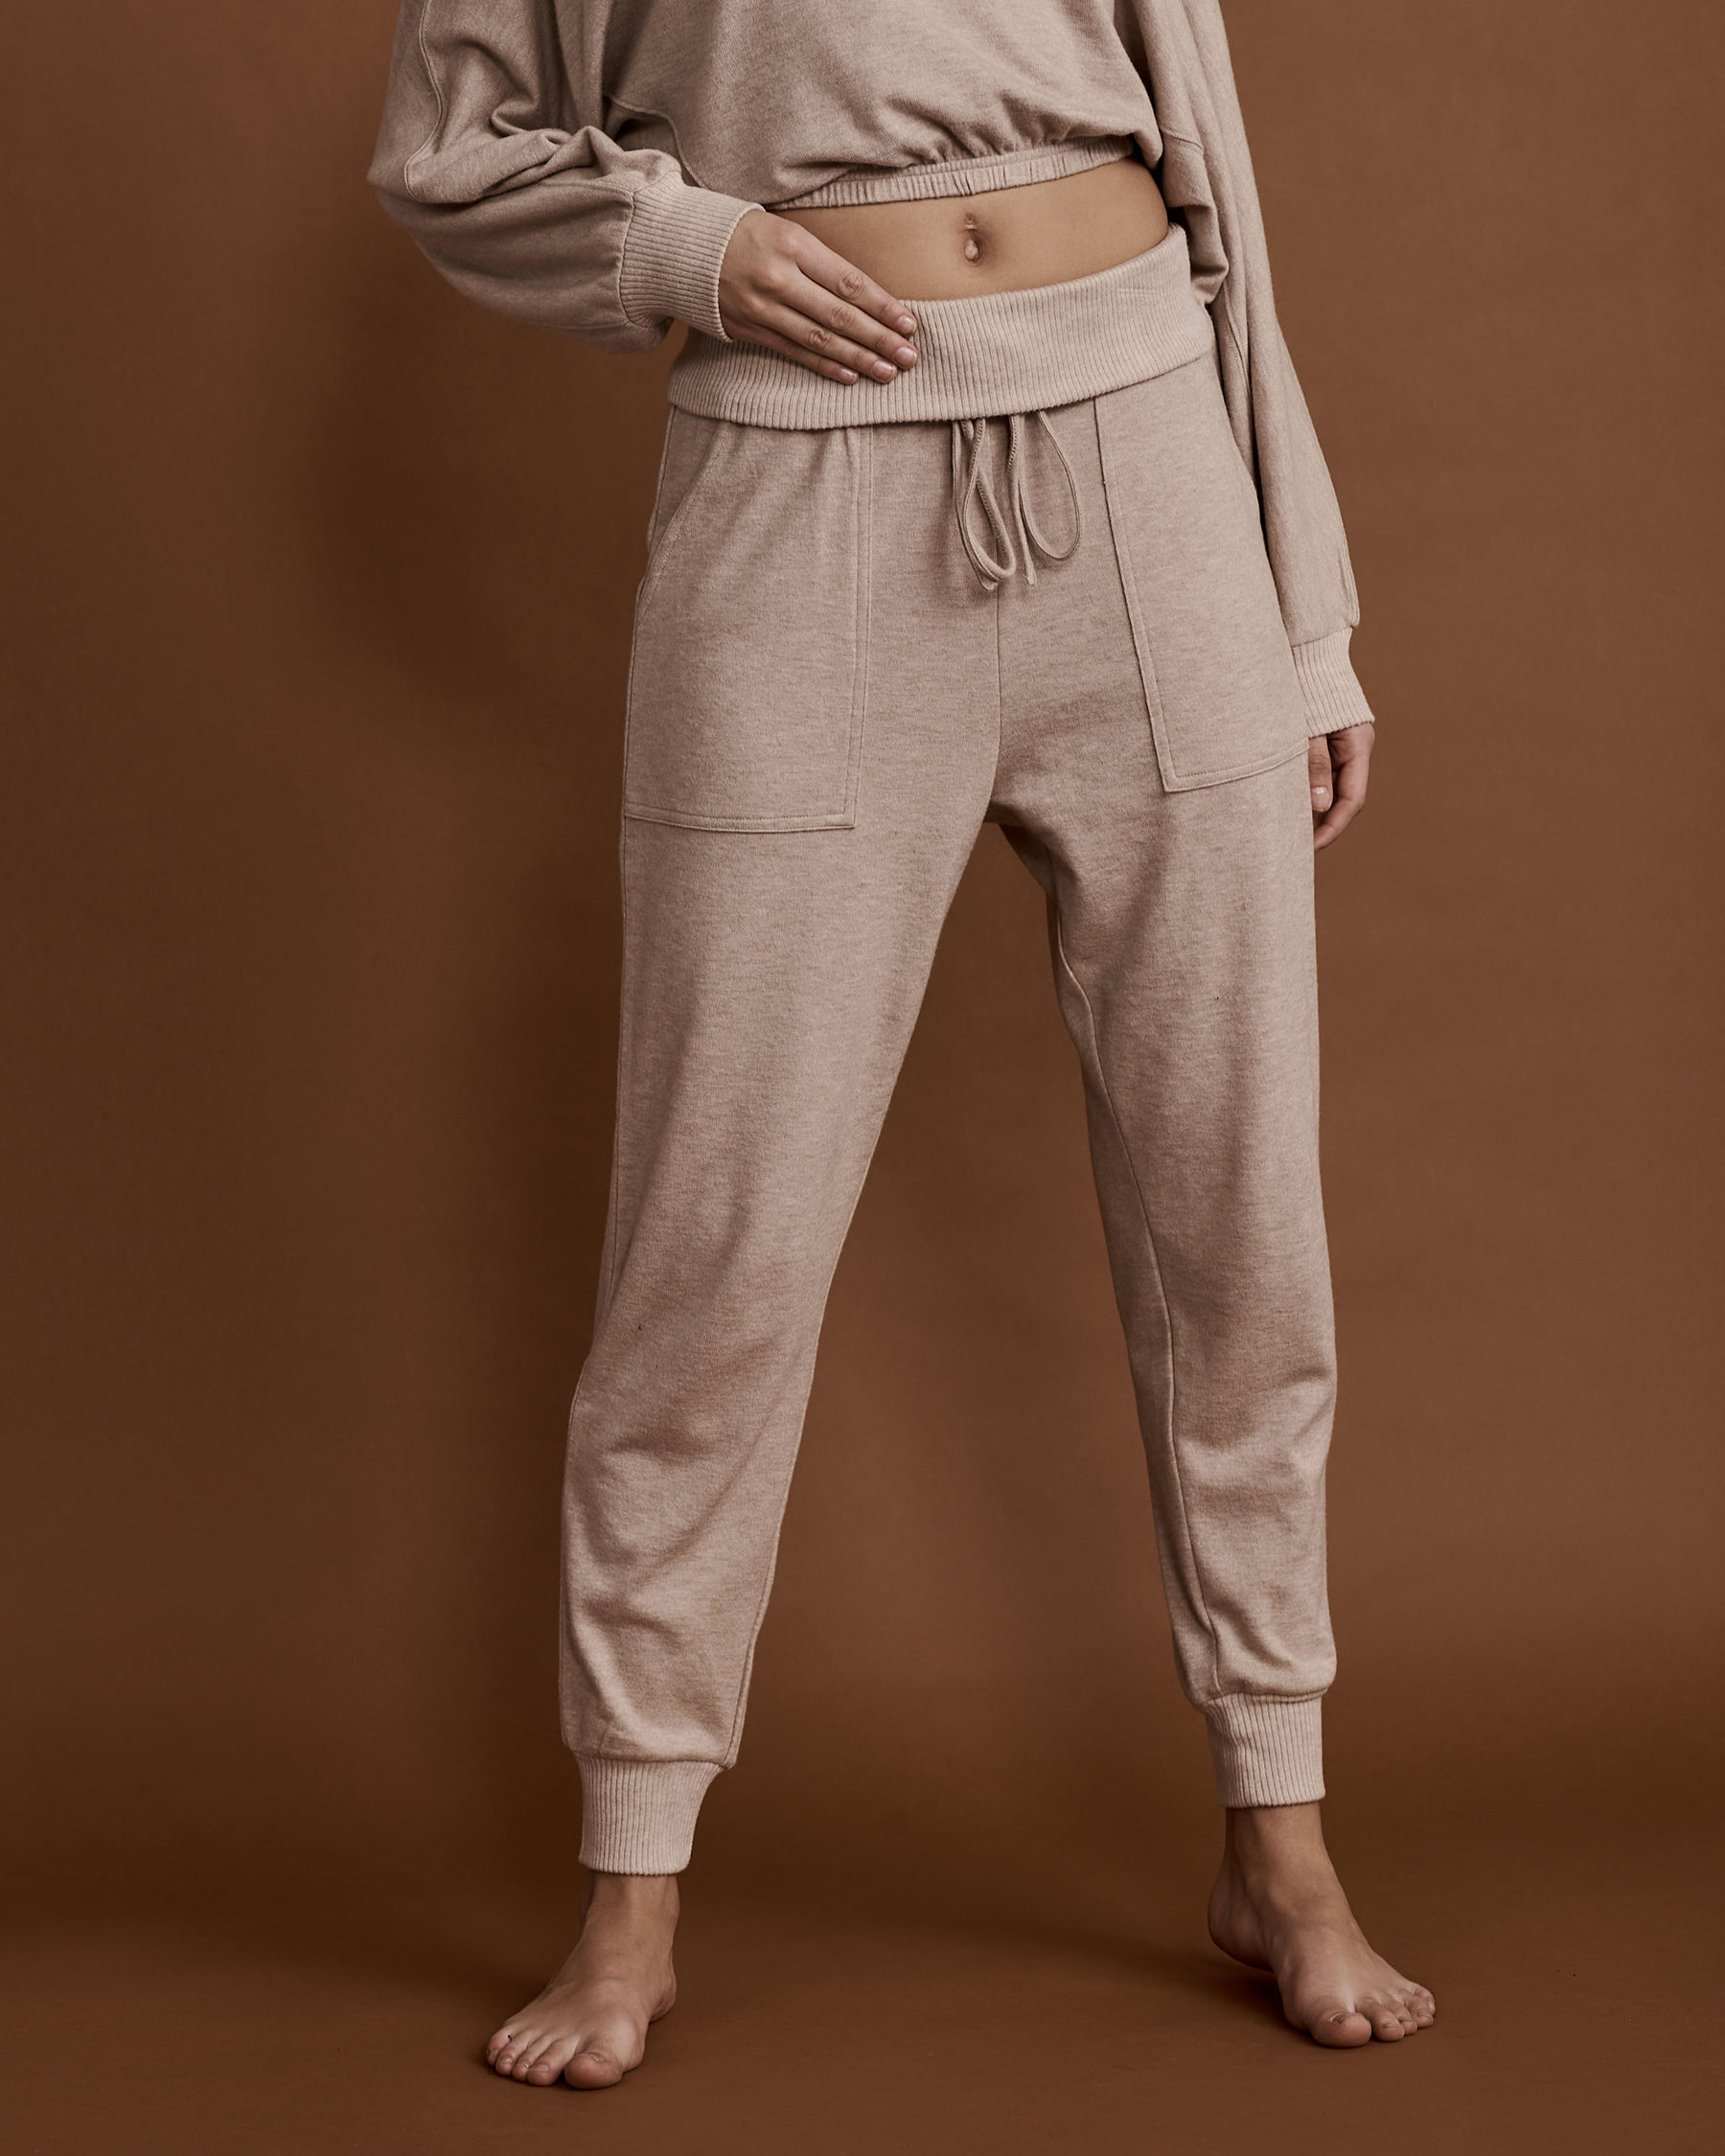 L*SPACE SLEEPIN IN Jogger Pant Oatmeal SLEPA21 - View1